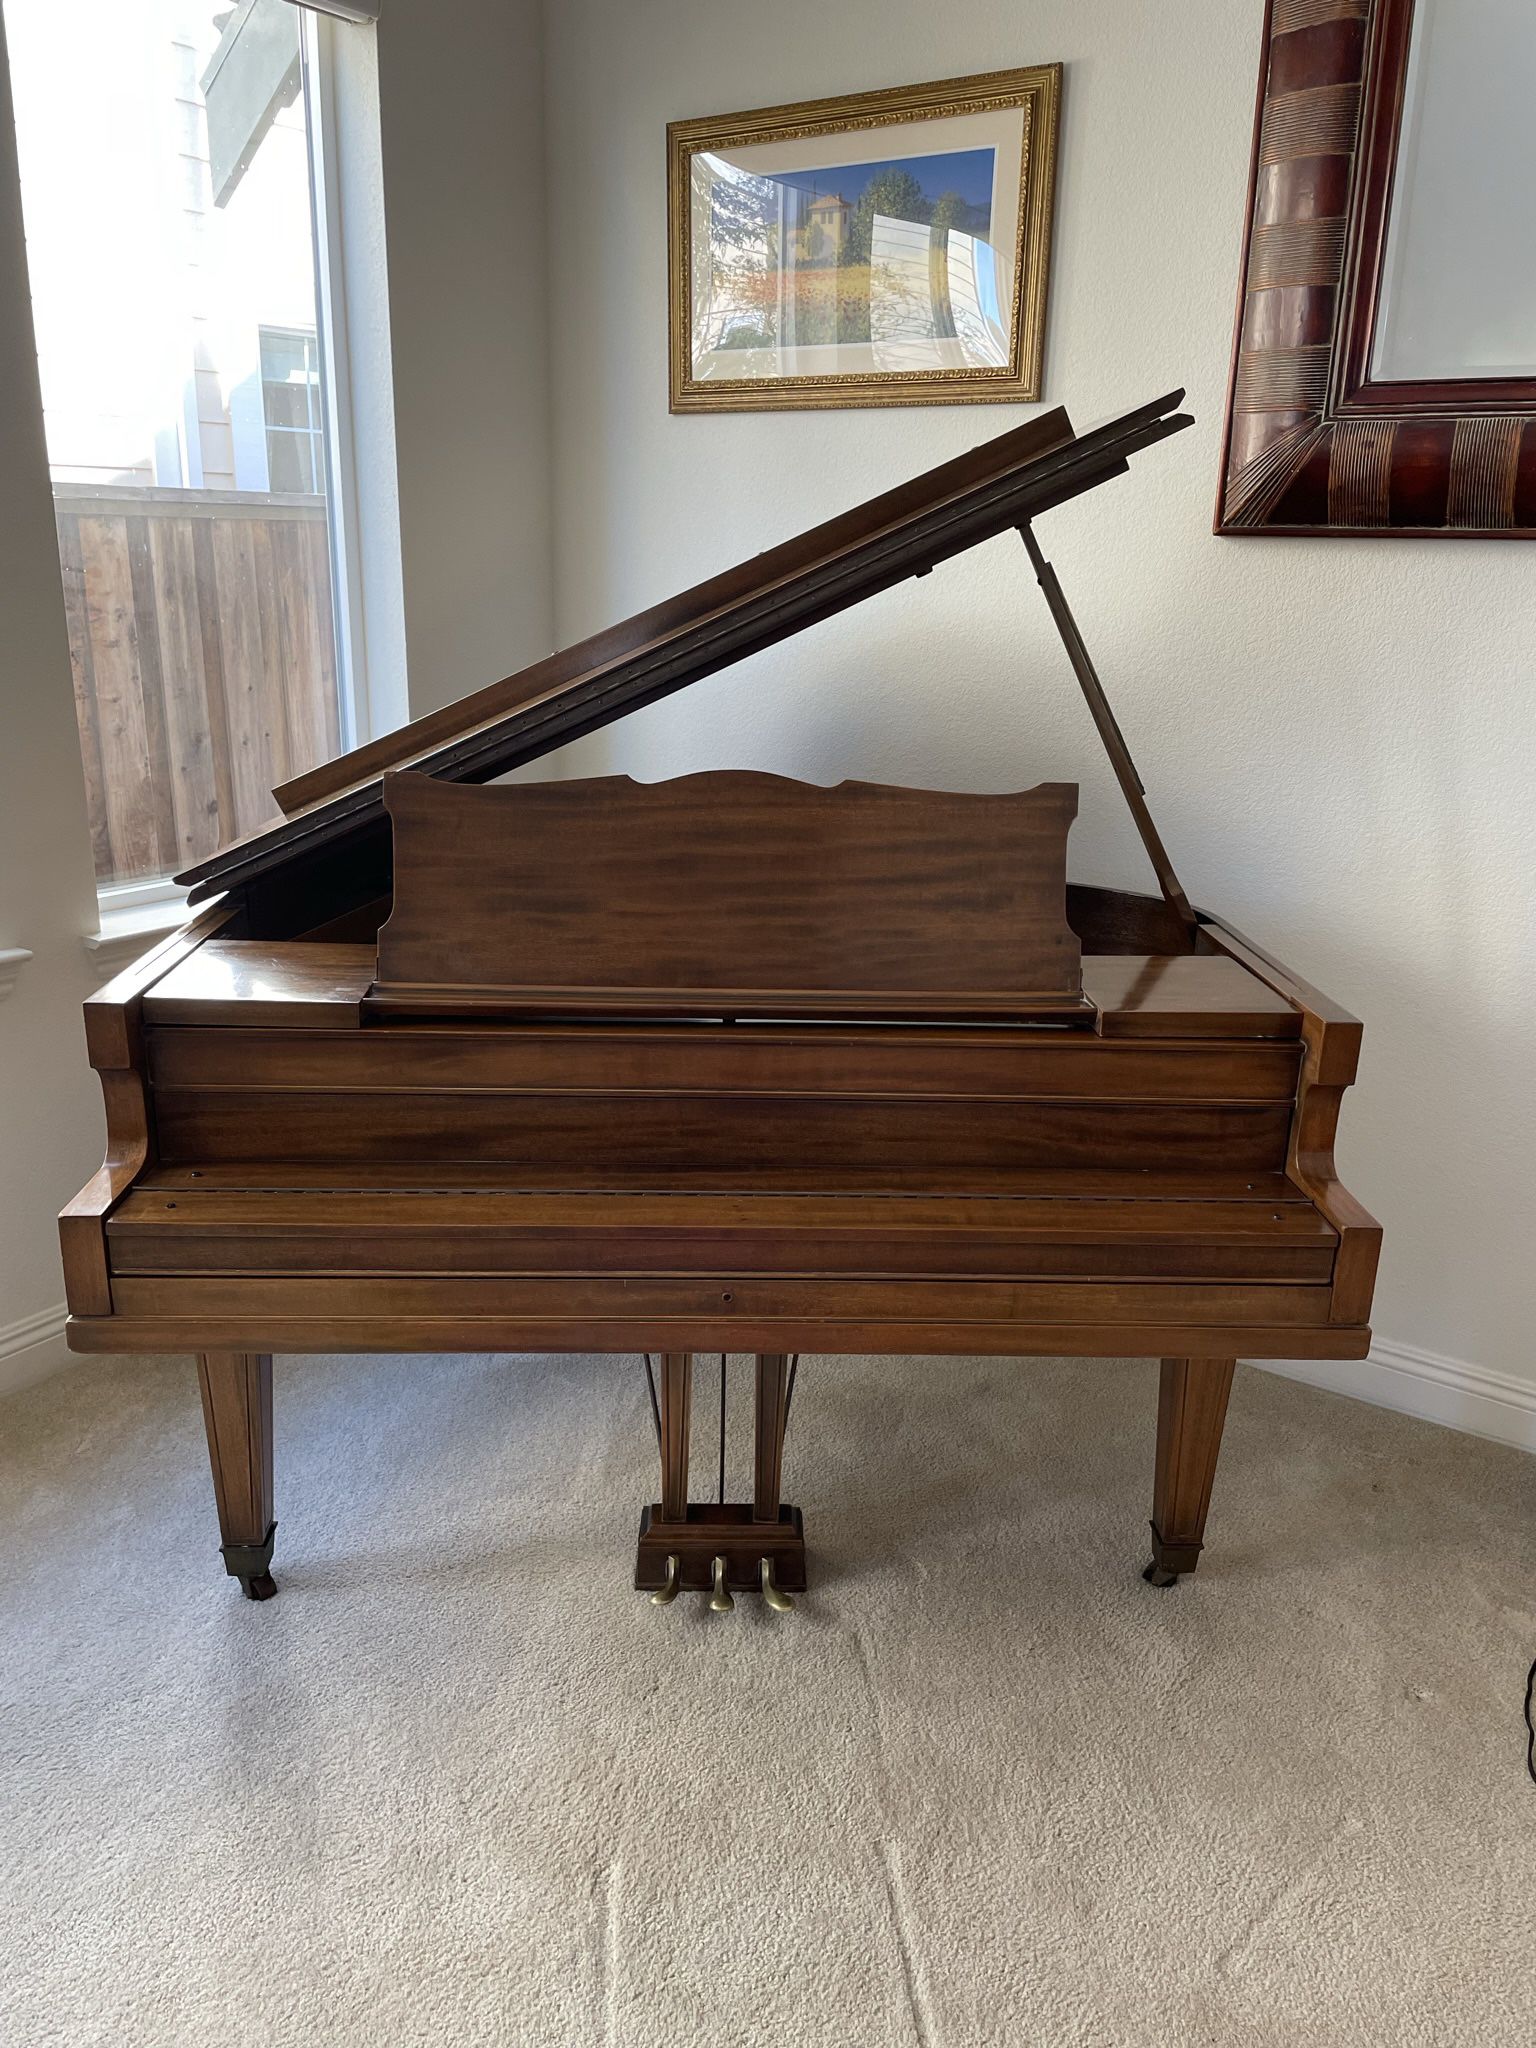 Free - Baby Grand Piano - Jesse French & Sons (circa 1927)